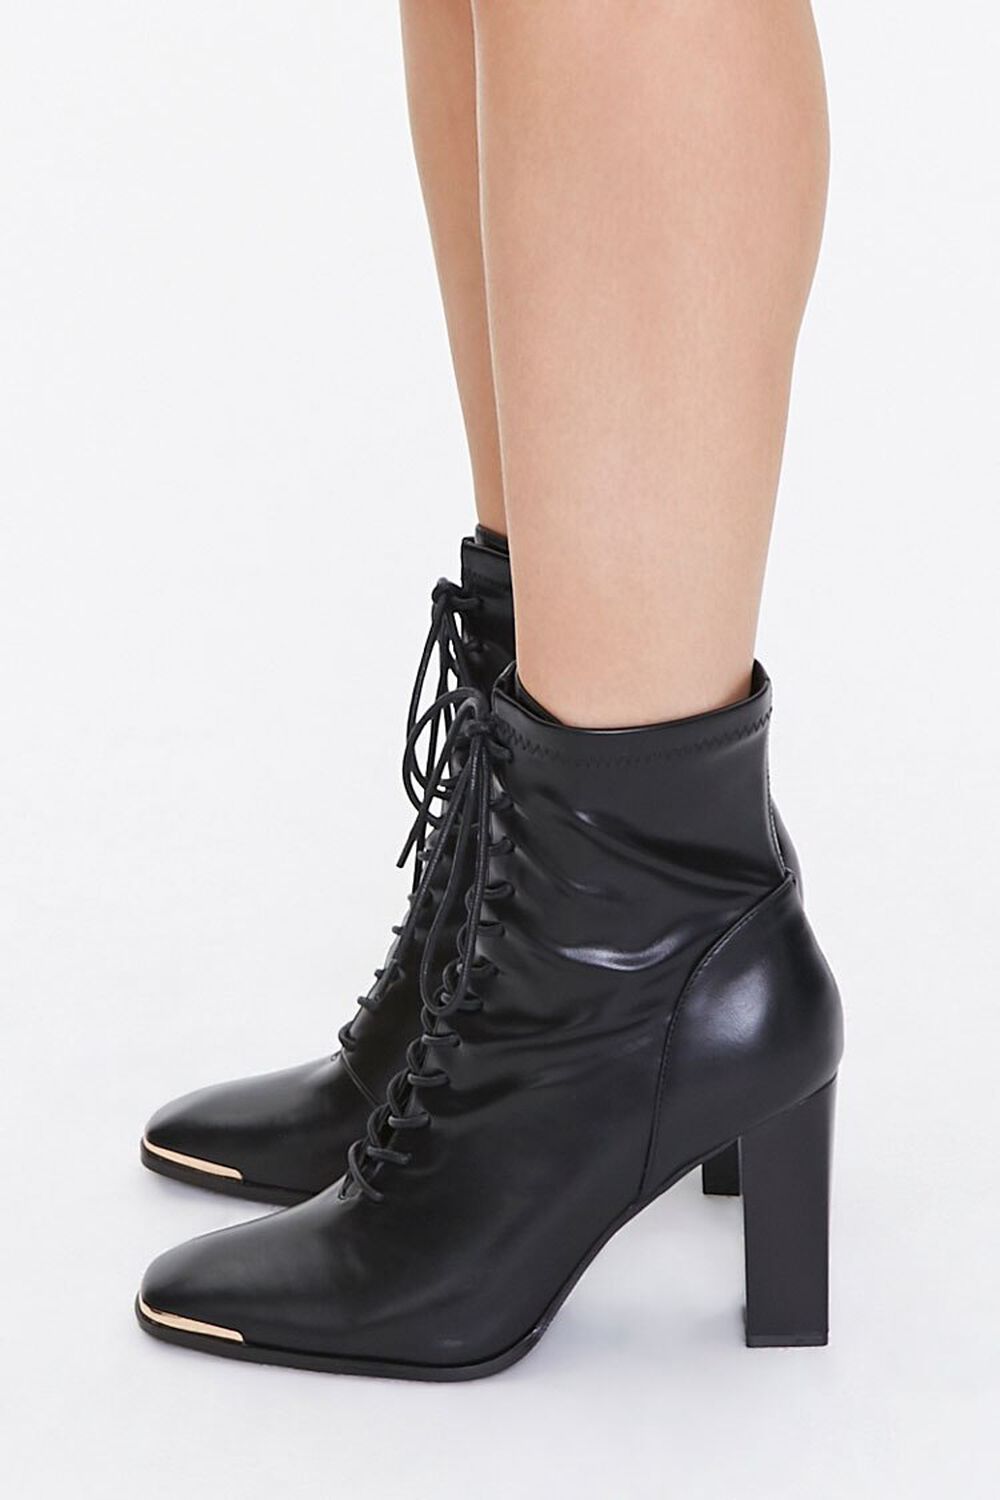 Faux Leather Metal-Toe Booties, image 2